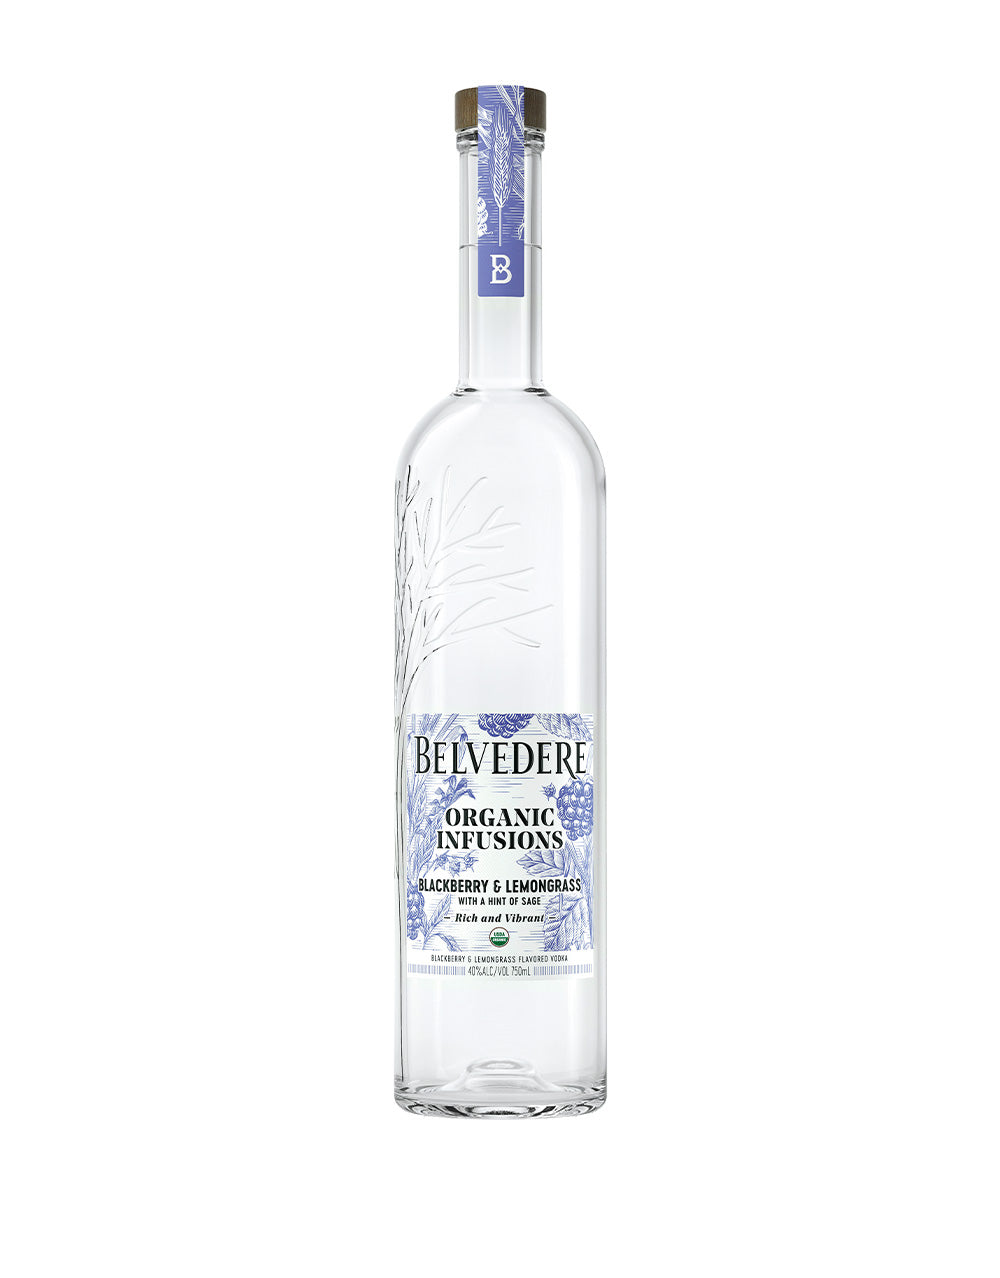 Belvedere Organic Infusions Blackberry & Lemongrass Vodka, 70 cl WITH – The  Bottle Club